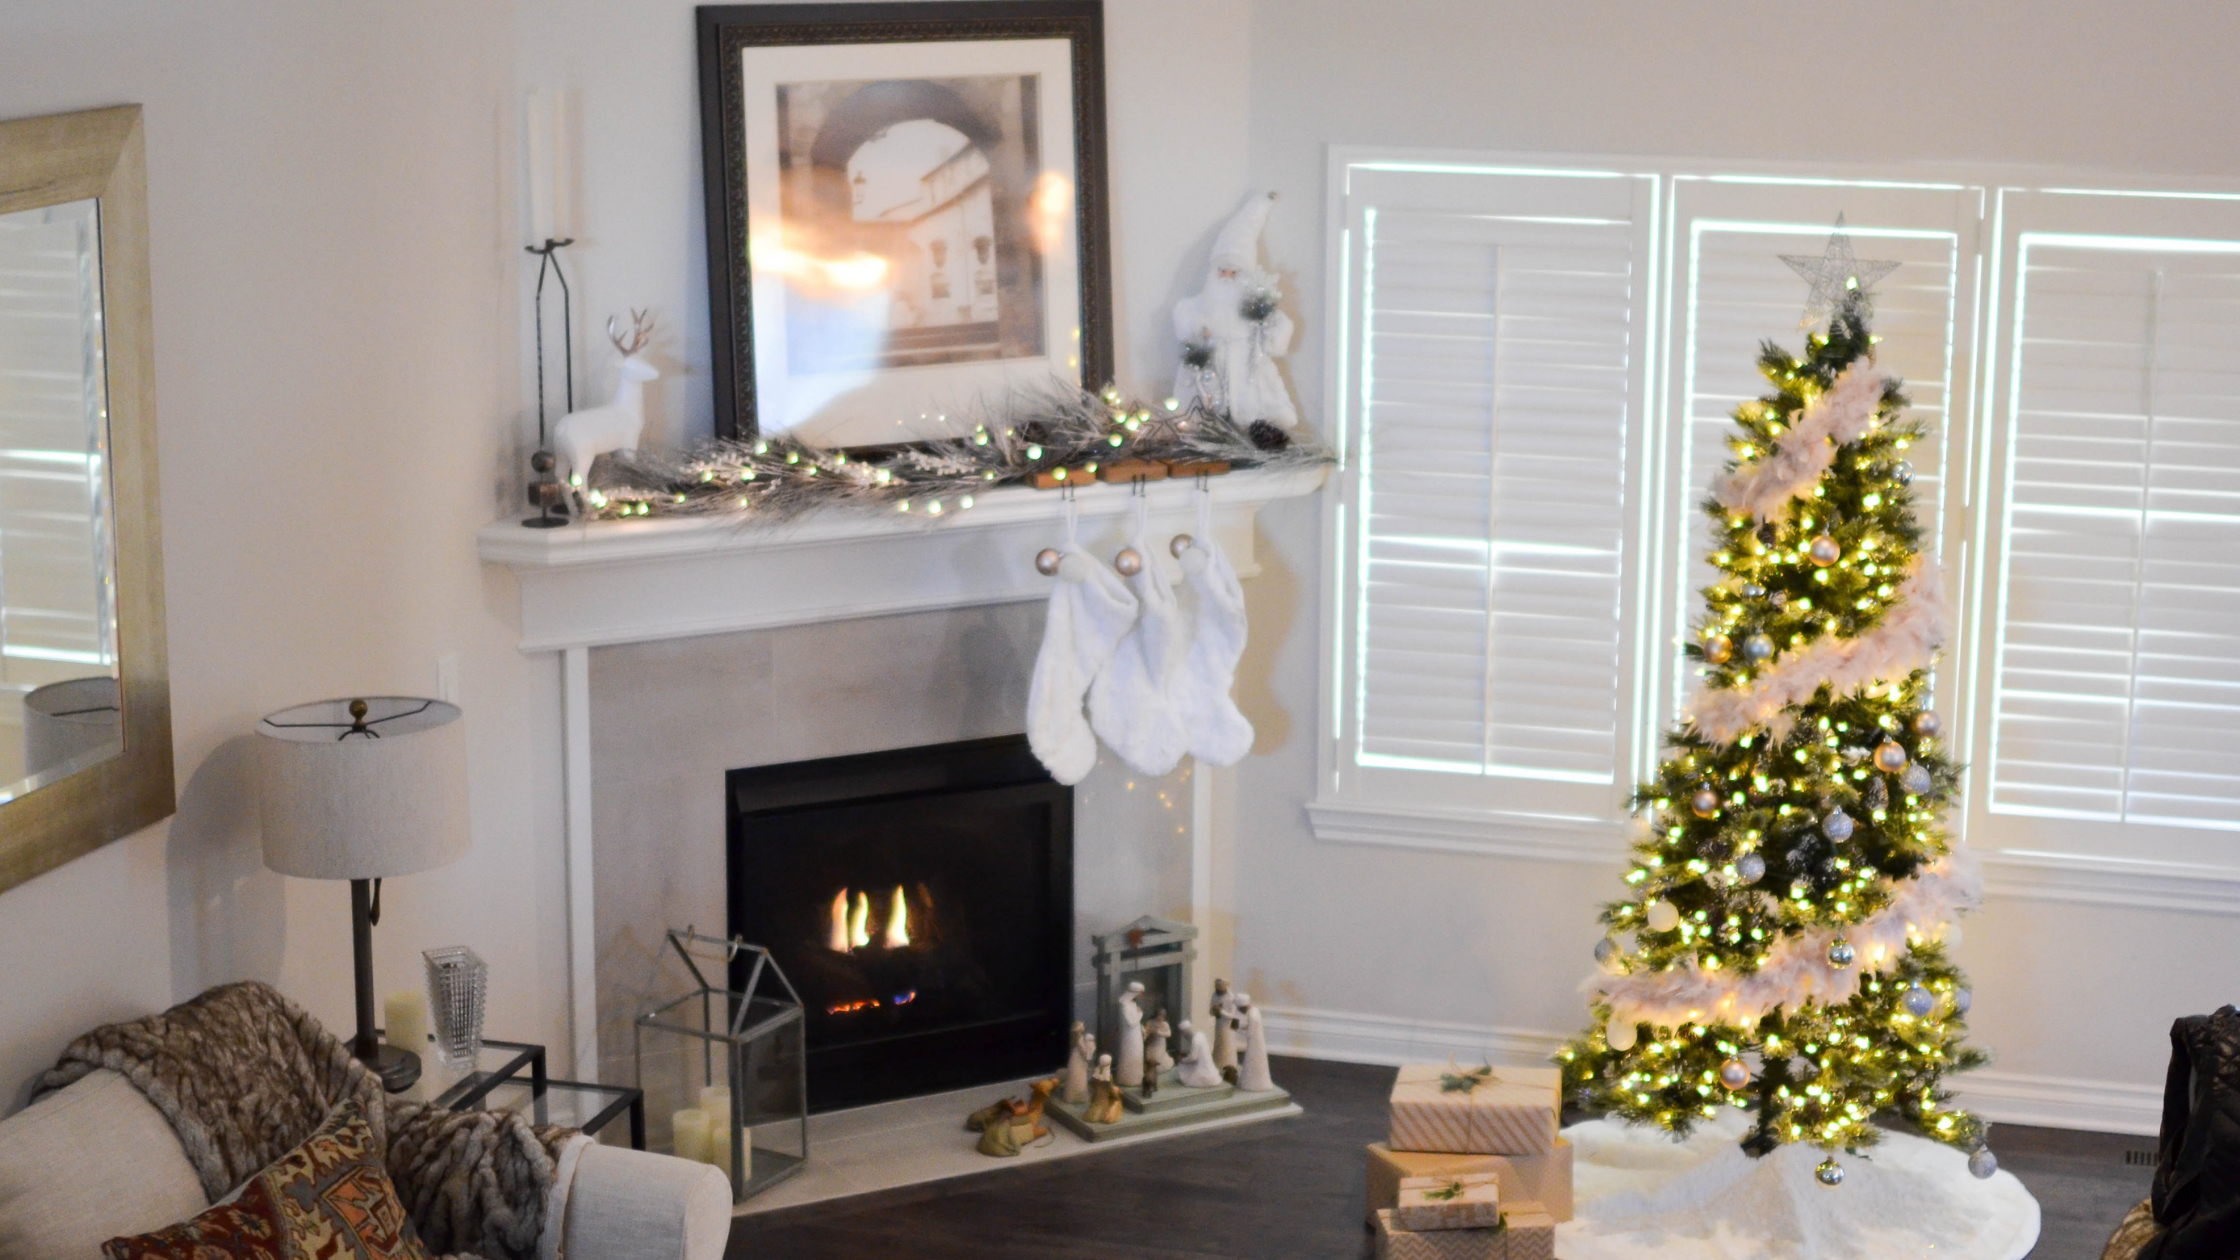 living room in a home decorated for Christmas with a tree and stockings hanging above the fireplace